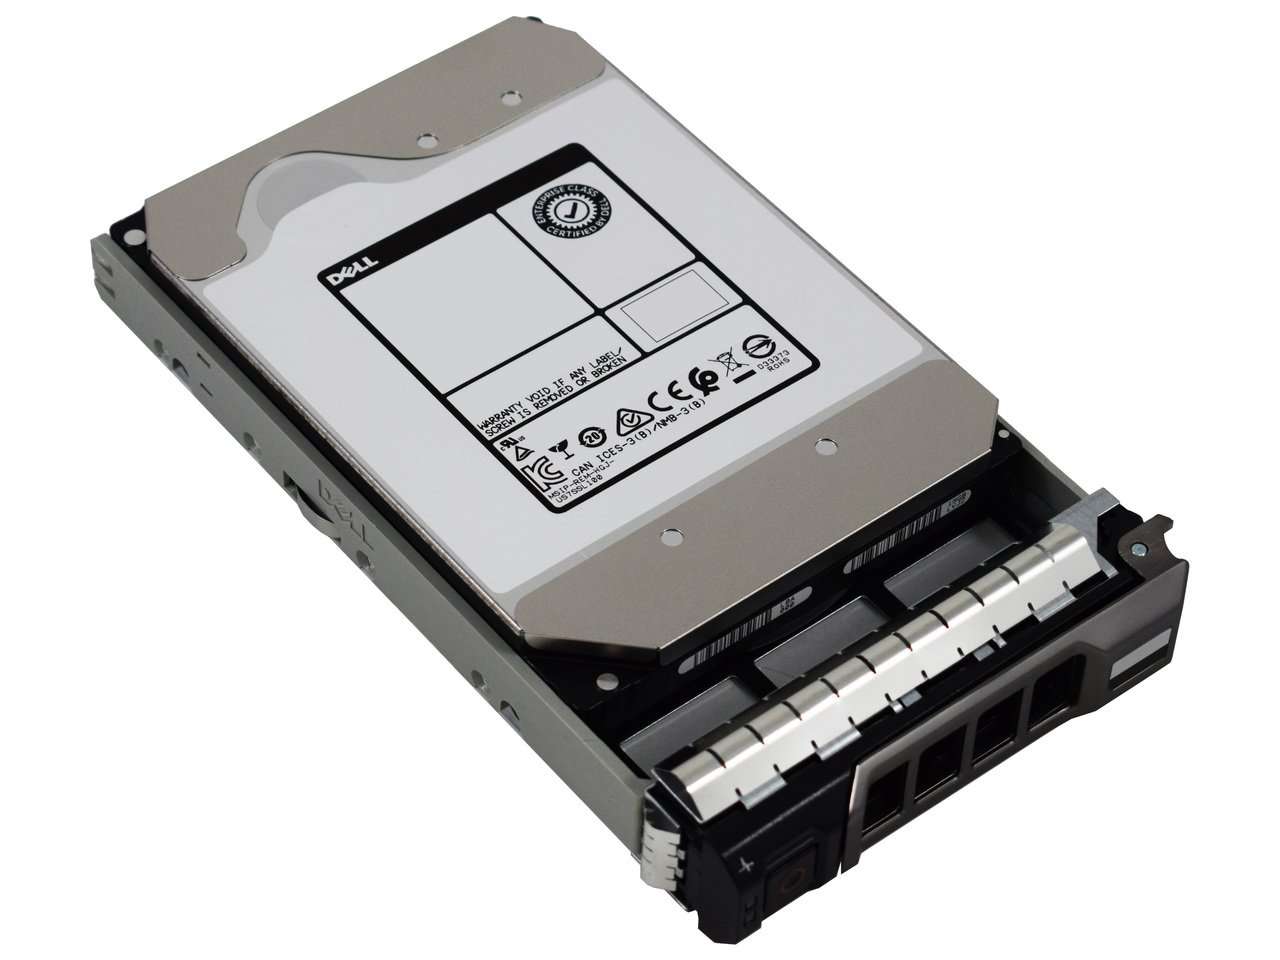 Dell G13 0FV4DC 2TB 7.2K RPM SAS 6Gb/s 512n 128MB 3.5" NearLine Manufacturer Recertified HDD